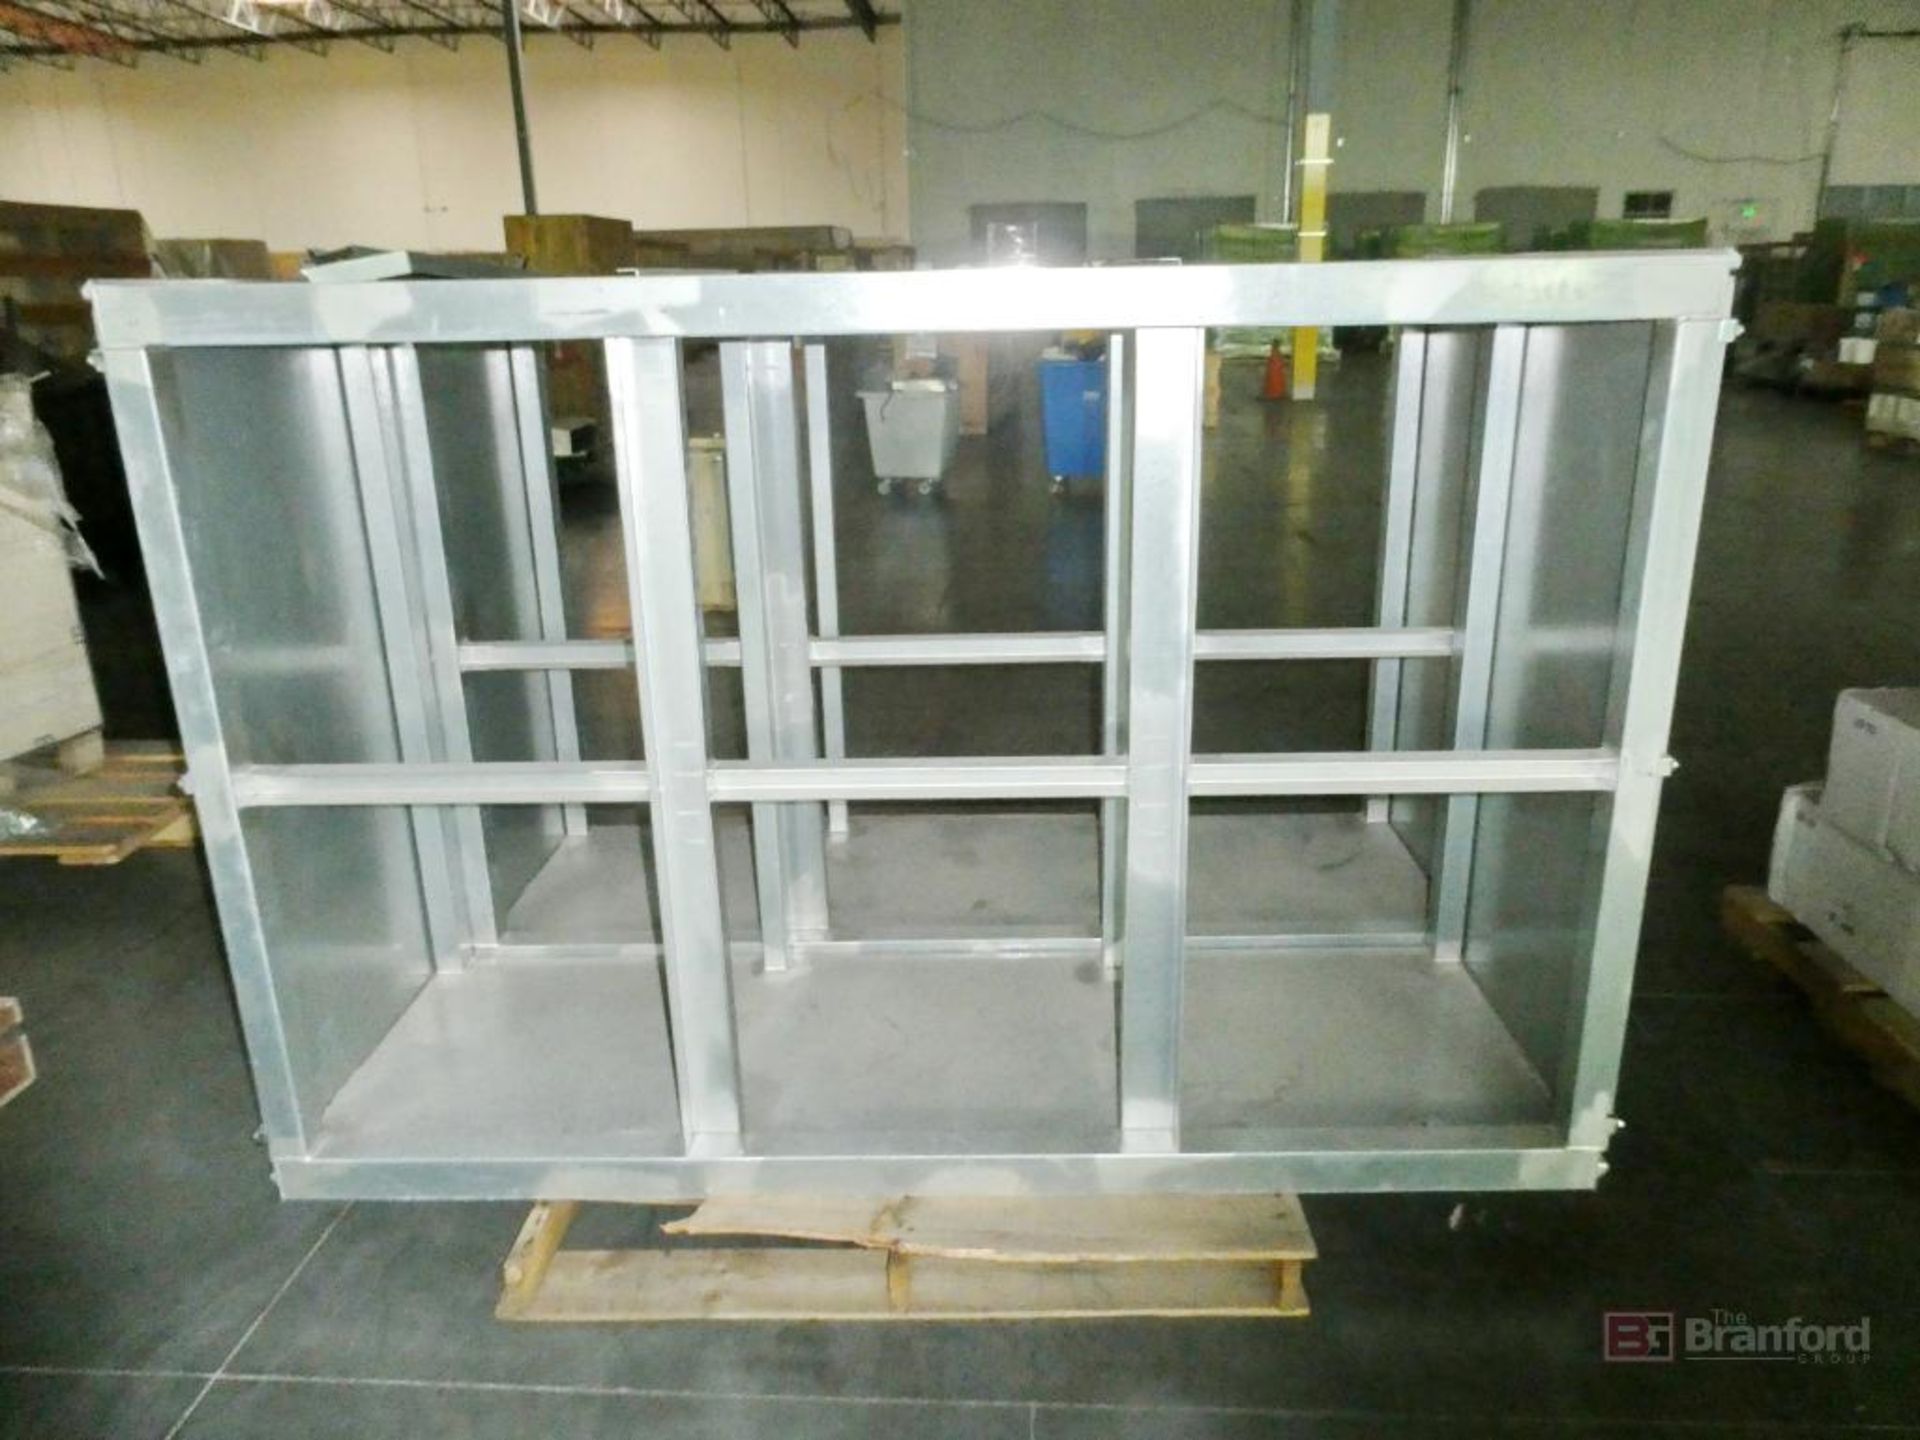 (2) Camfil Model M/P4-12I 2x3, Steel Housing for Air Filtration System - Image 2 of 3